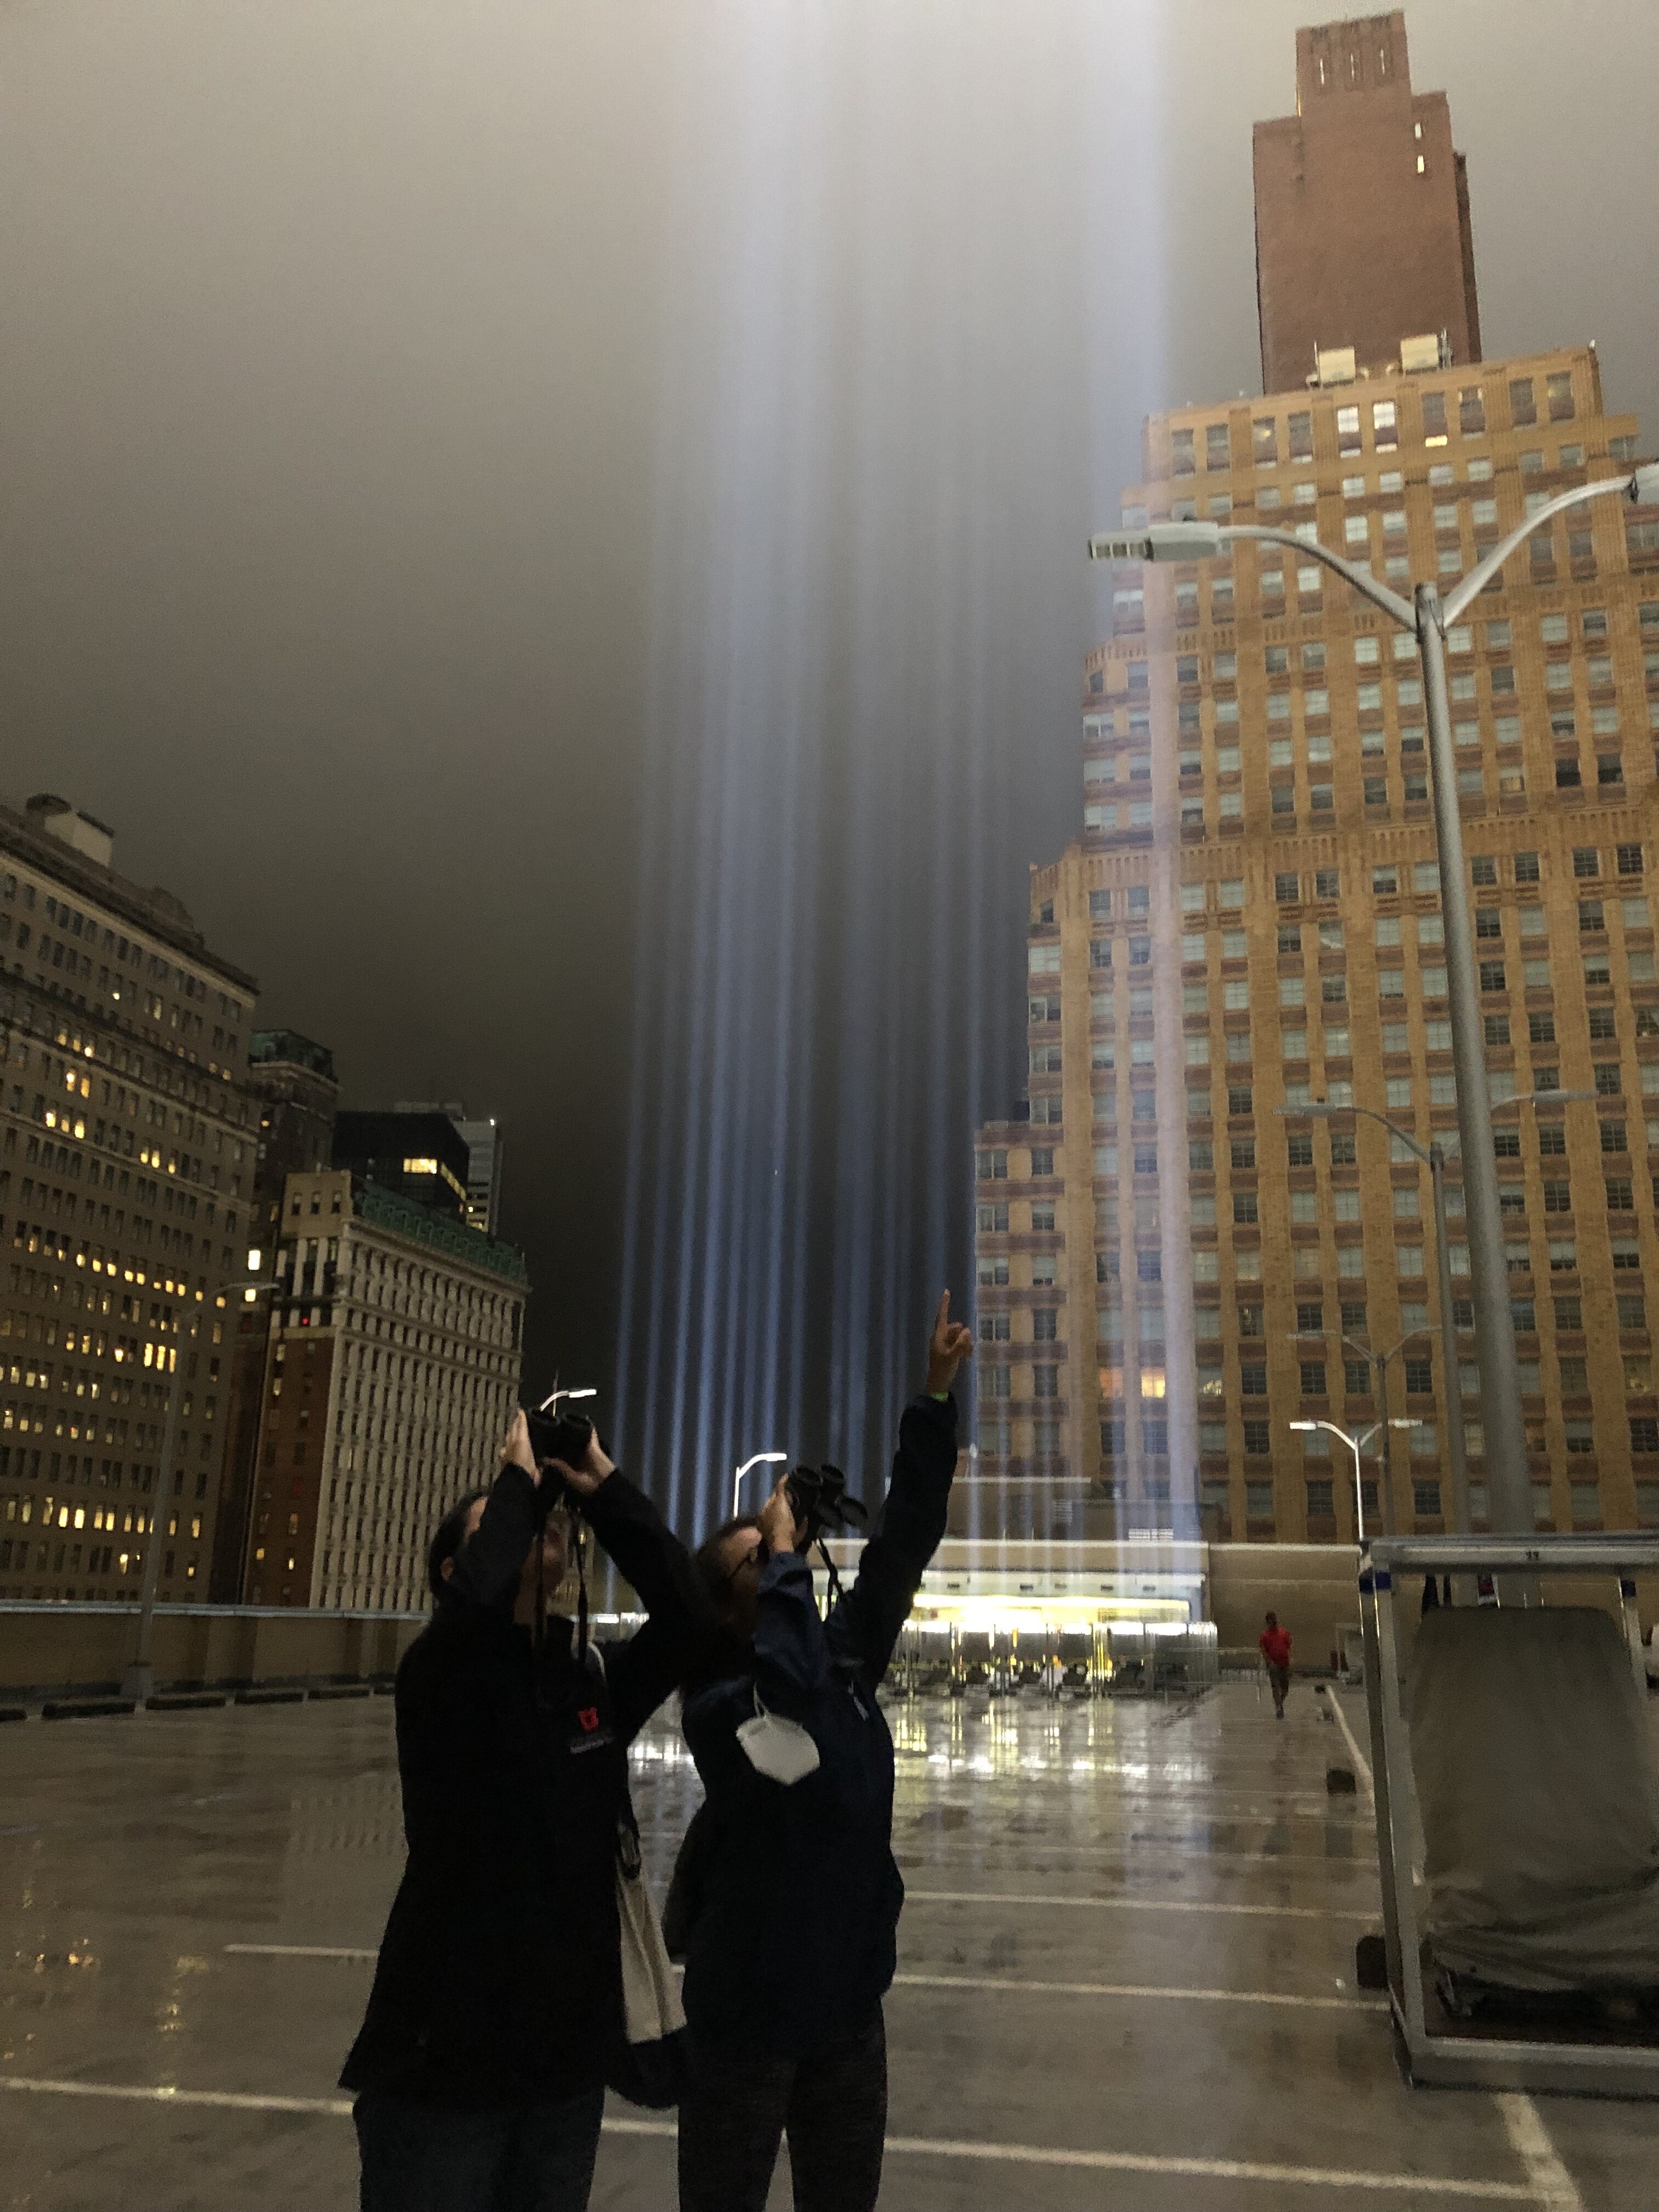 Community Science Manager Katherine Chen and Public Programs Manager Roslyn Rivas monitor the Tribute in Light for birds caught in the lights. Photo: NYC Audubon